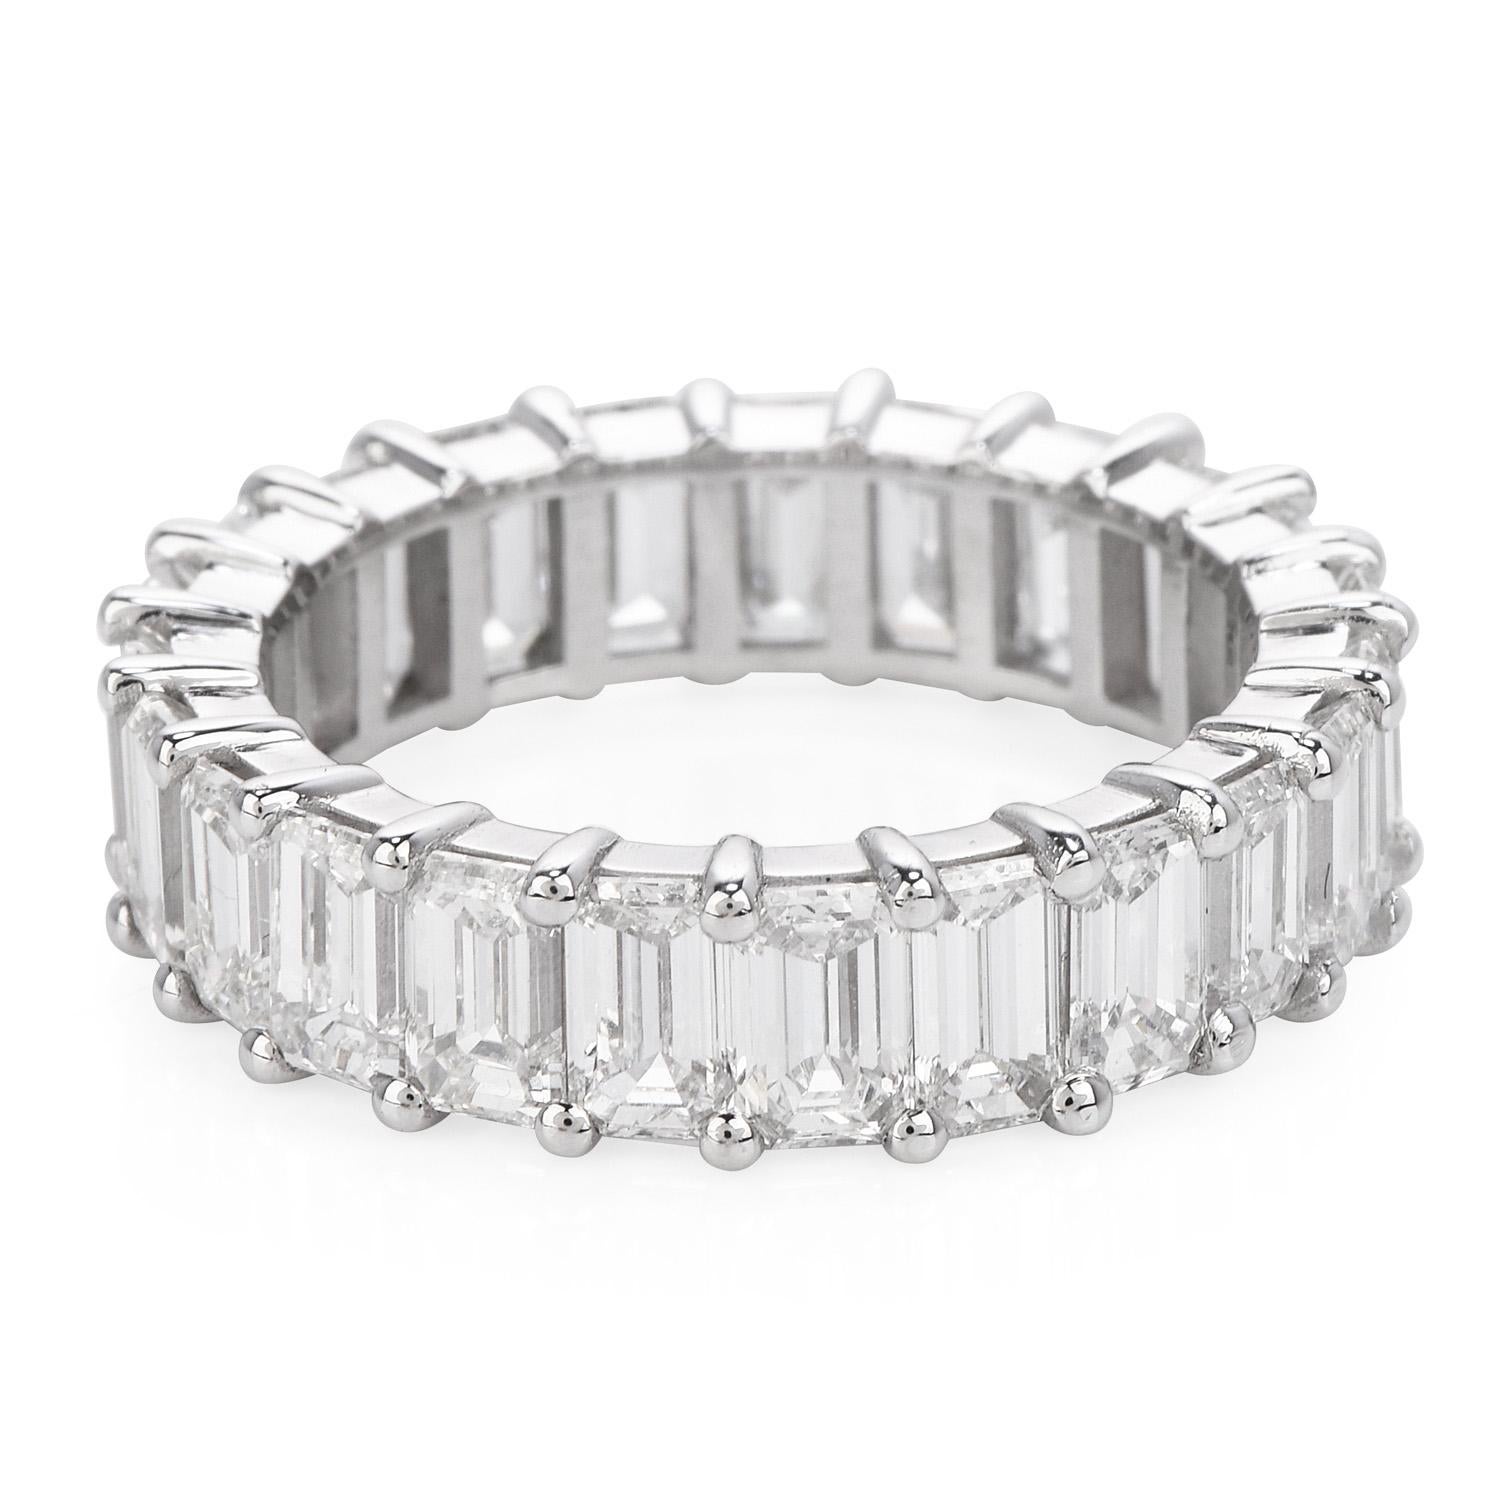 This Classic This eternity wedding band ring has a classic timeless look,

Crafted in solid 14K white gold, it is adorned by (23) Baguette-cut, pave set, genuine diamonds

weighing in total 5.74 carats, (F-G color and VS1 clarity),

This piece